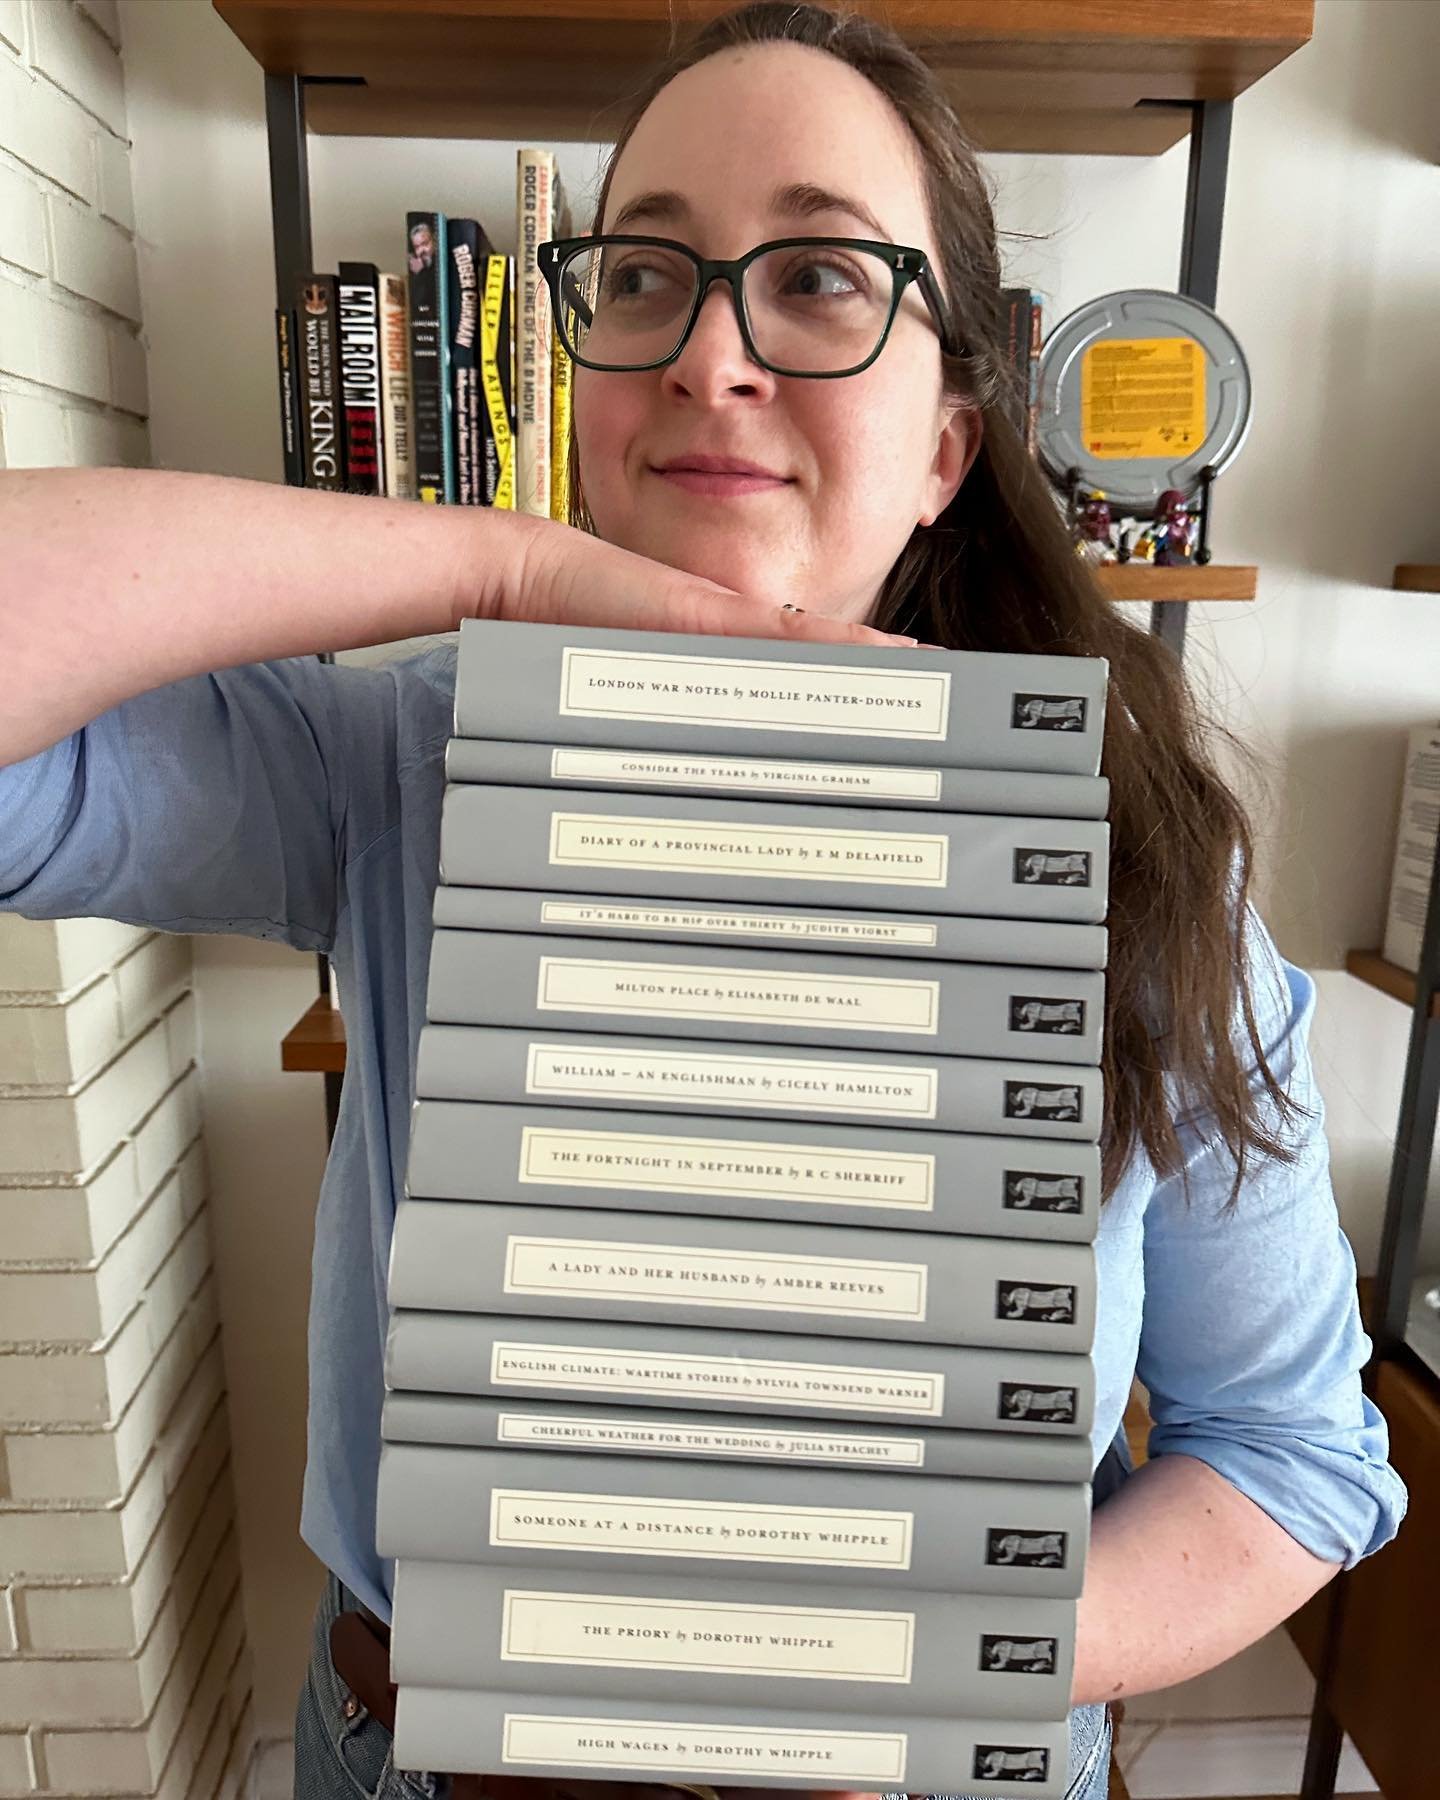 This weekend marks the start of the Persephone Festival, celebrating 25 years of the wonderful @persephonebooks. 

It&rsquo;s a special moment when you find a new favorite bookshop. That is precisely how I felt when I first walked into the old Persep